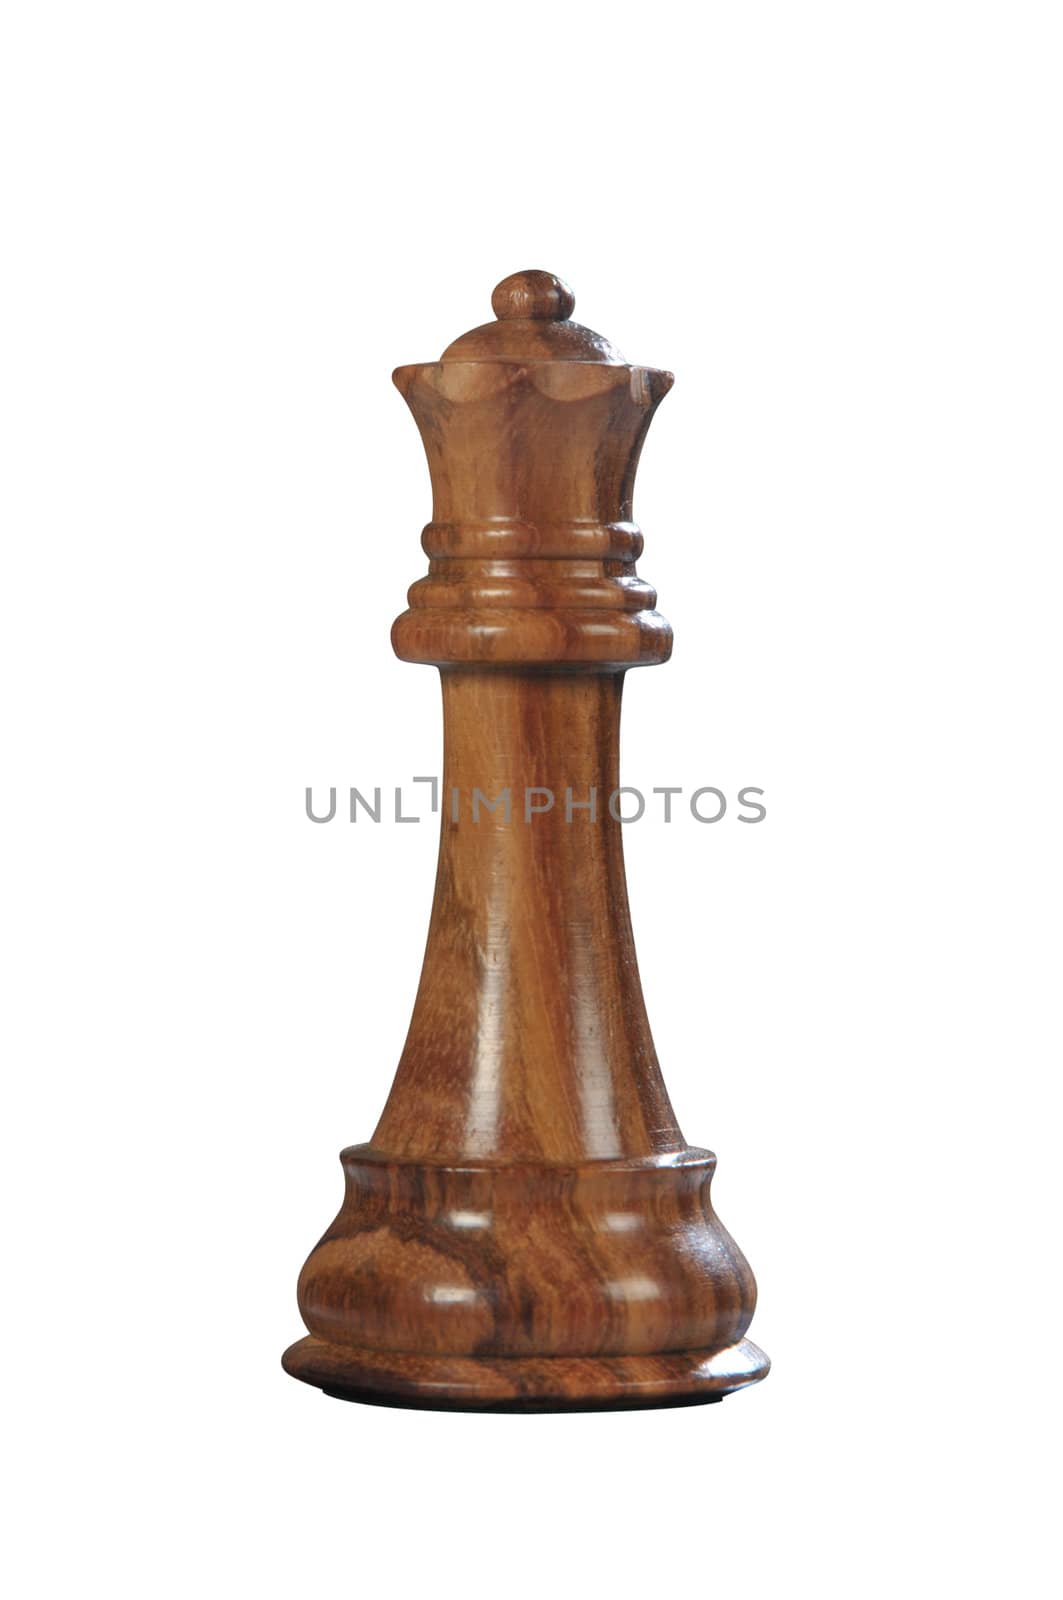 Black (brown) wooden queen - one of 12 different chess piece